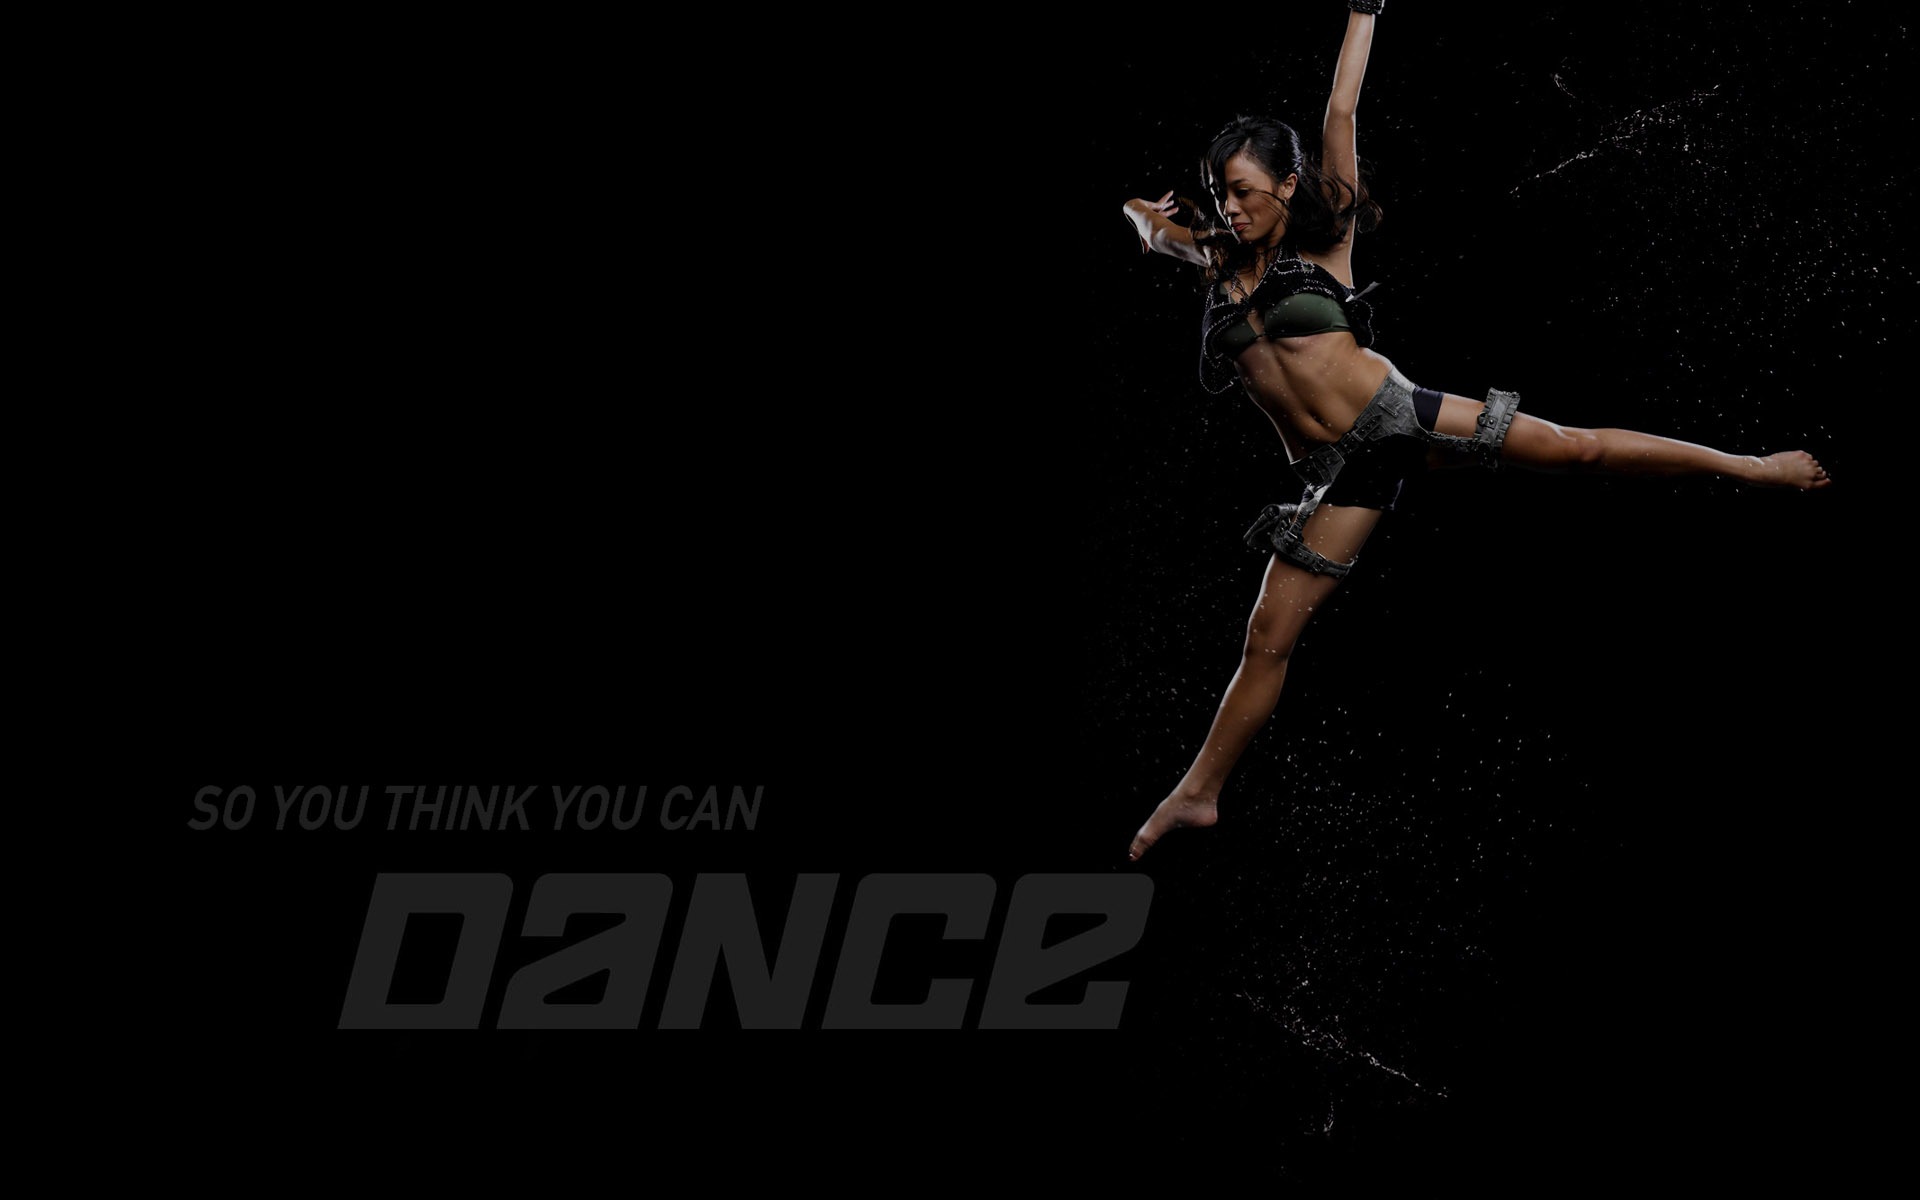 So You Think You Can Dance 舞林争霸 壁纸(二)3 - 1920x1200